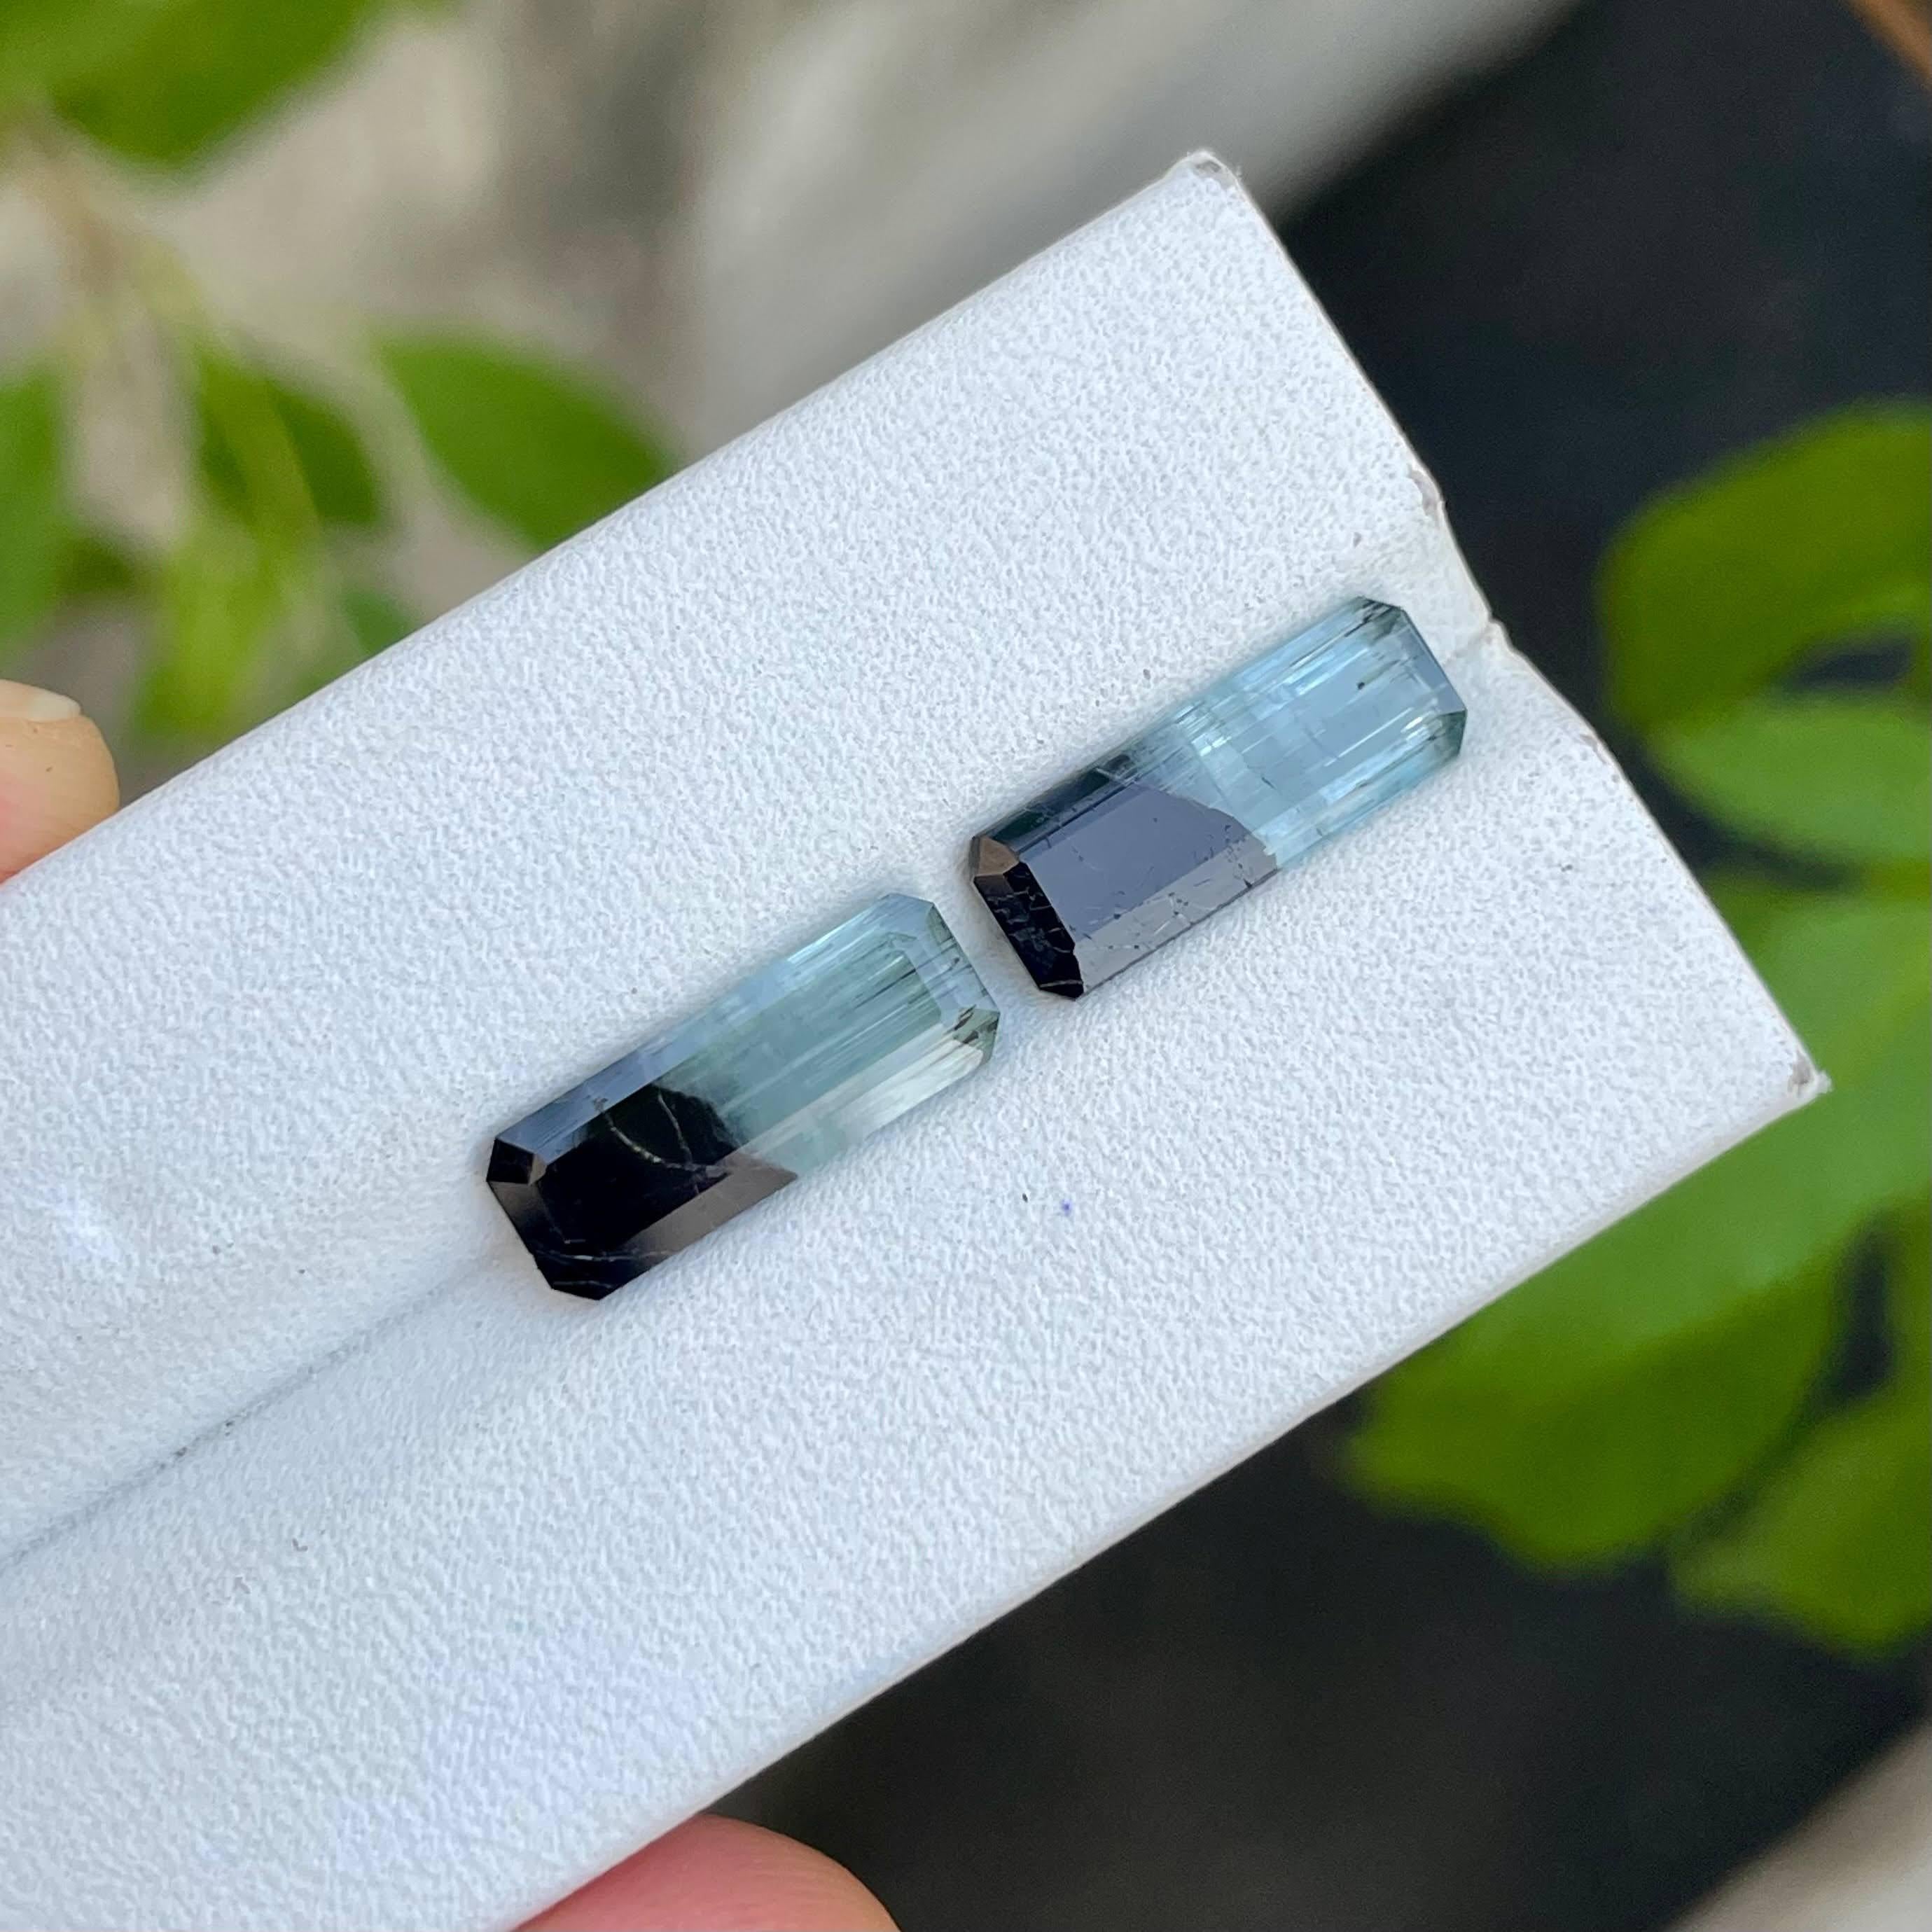 Weight 5.35 Carats
Dimensions 14.8x5.5x3.5 mm
Treatment None
Clarity SI
Origin Afghanistan
Shape Octagon
Cut Emerald cut




Experience the captivating beauty of our Bicolor Tourmaline Pair 5.35 carats - a stunning duo of gemstones showcasing a